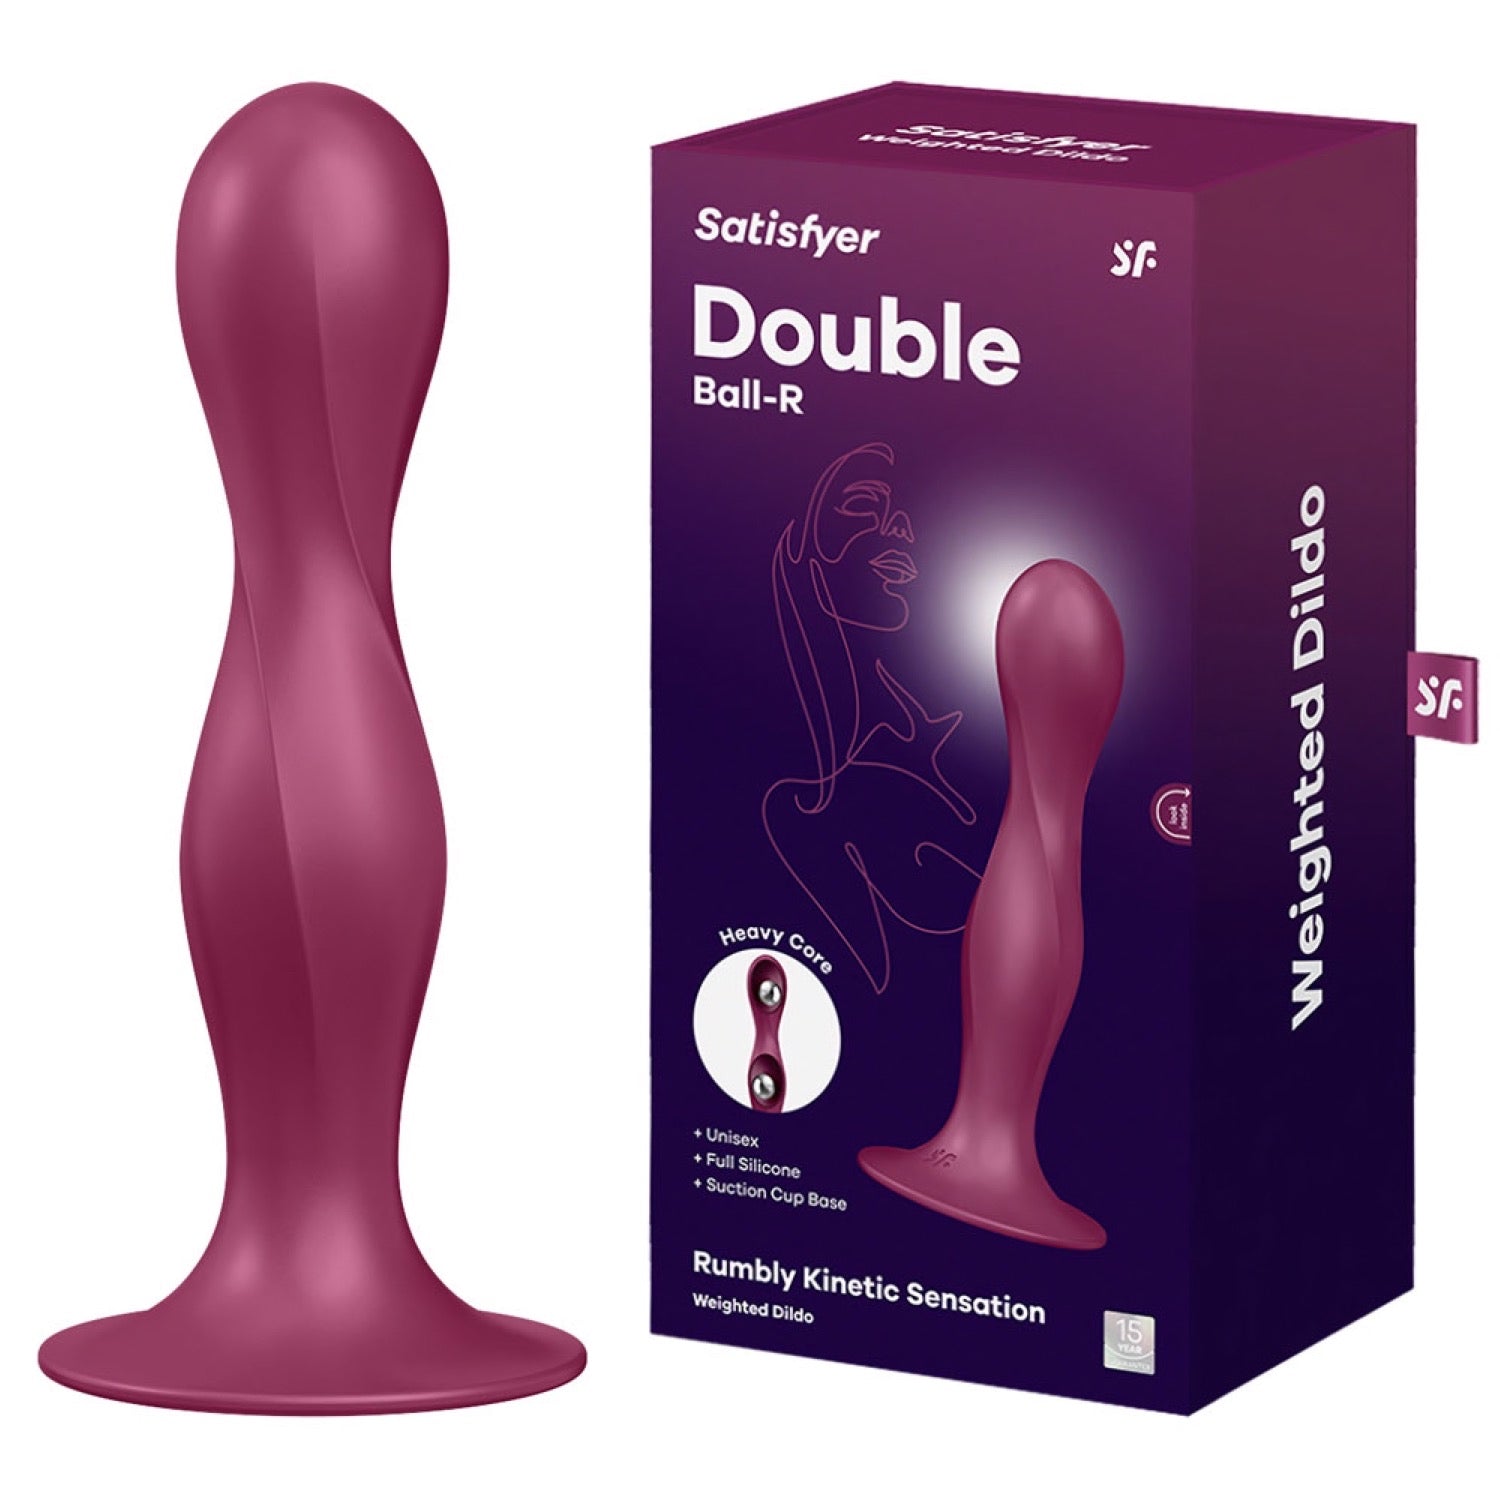 Satisfyer Doule Ball-R - Red by Satisfyer